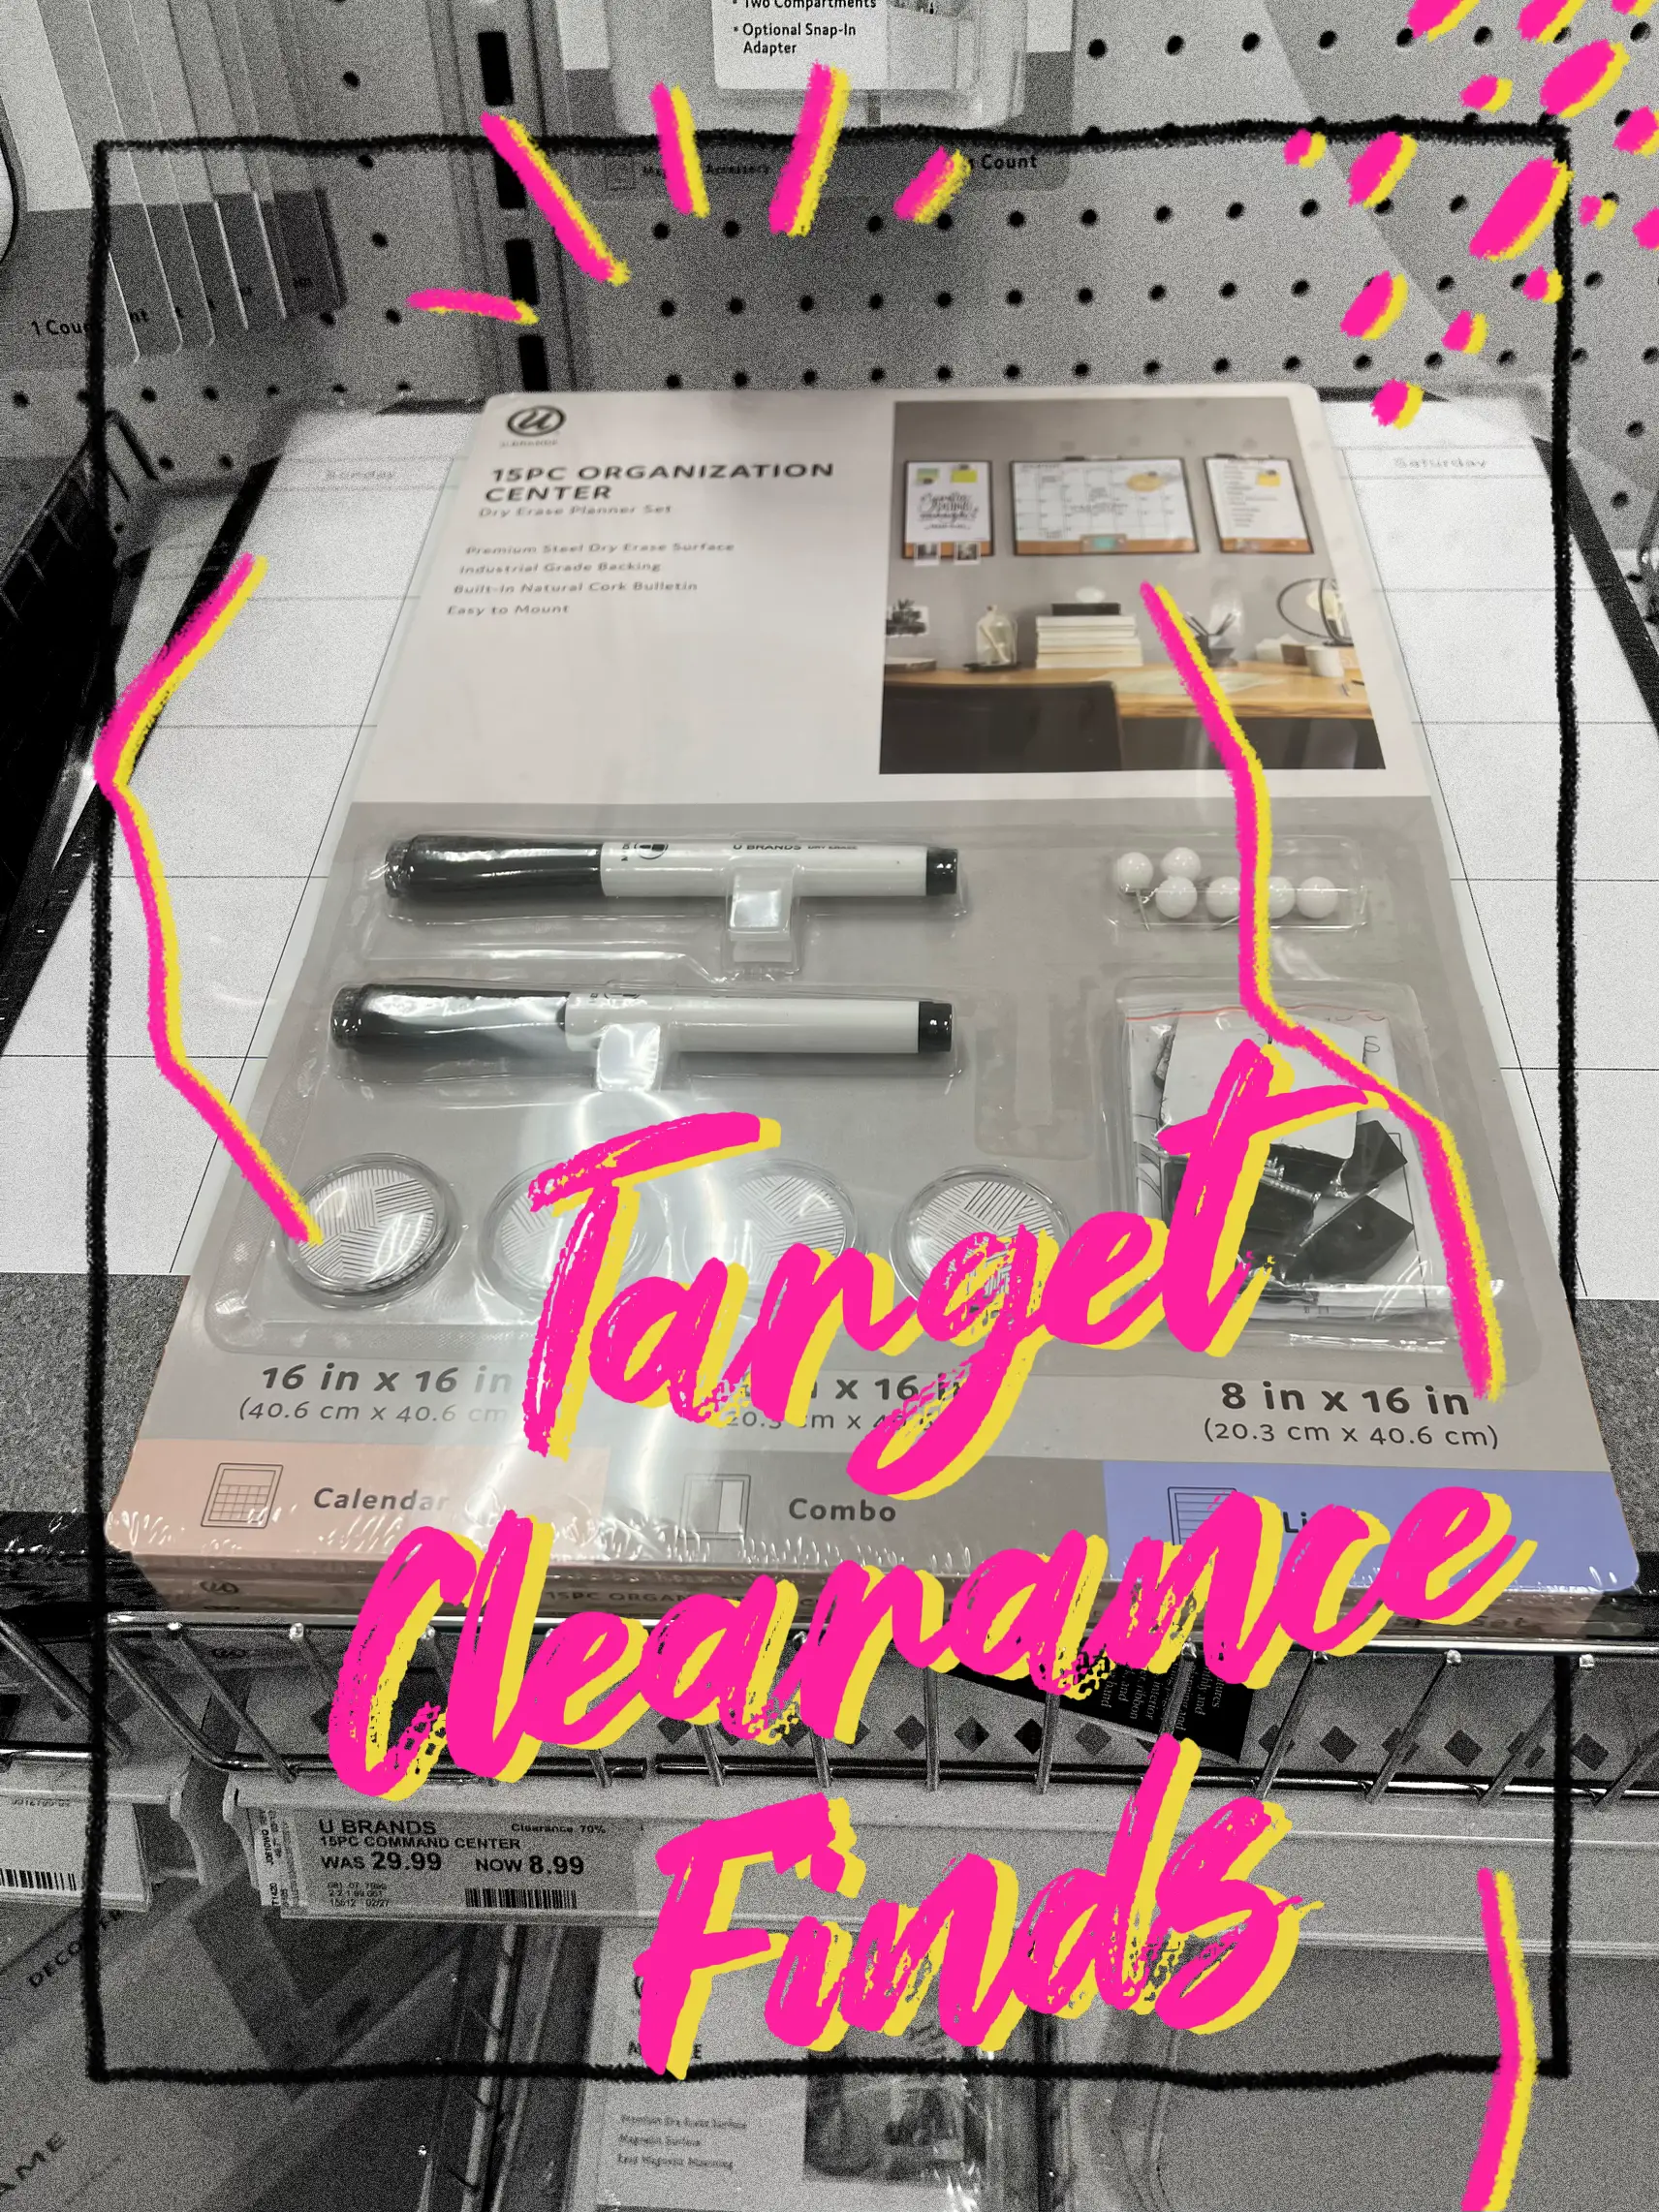 Finding clearance sections in target